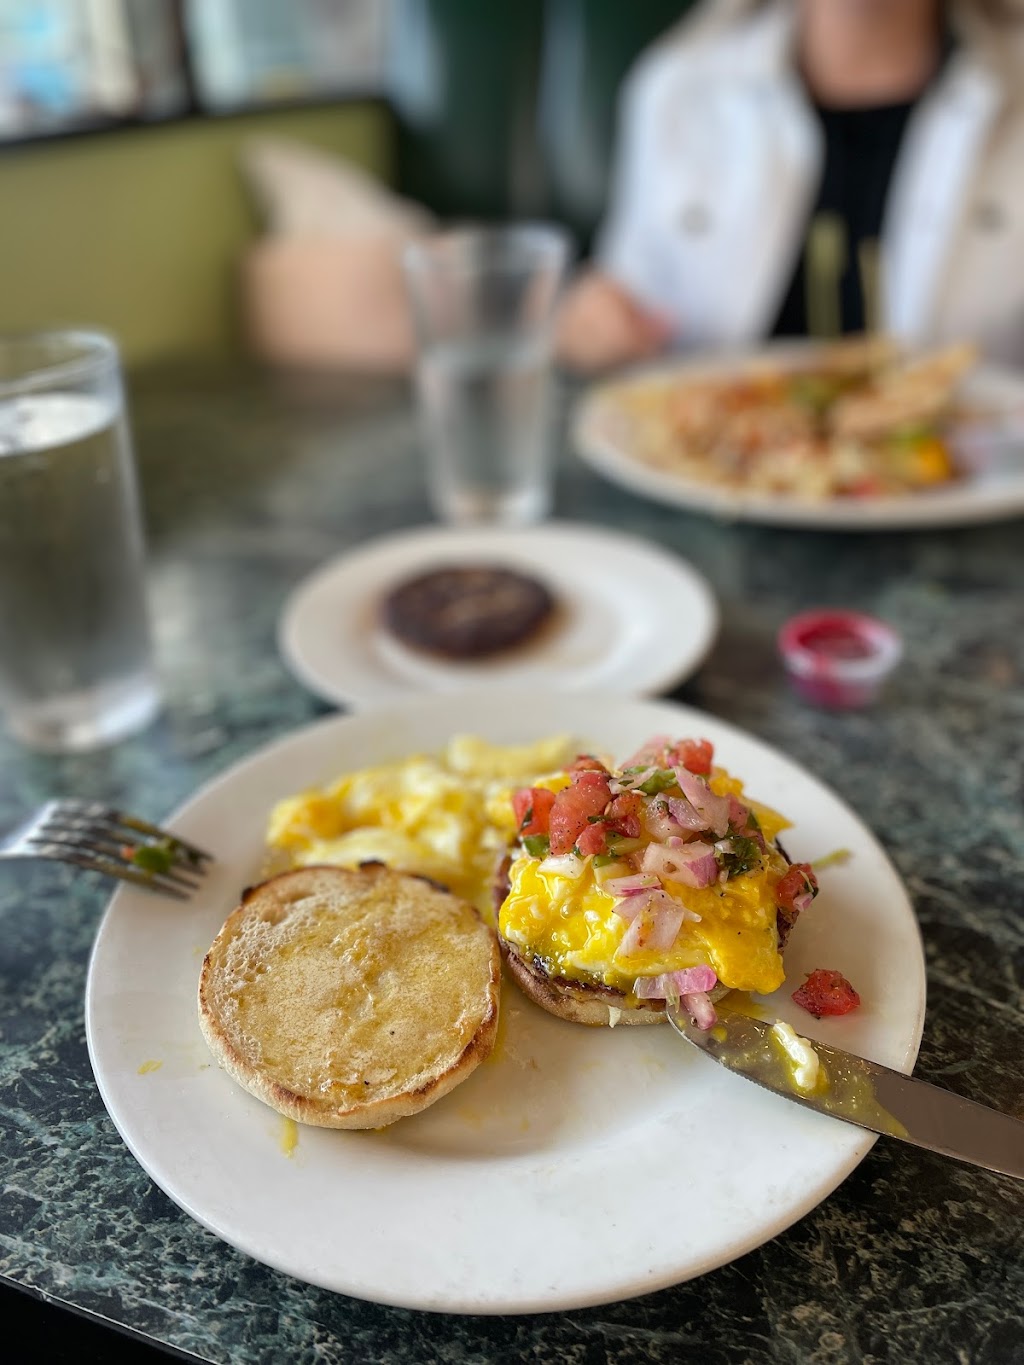 Shellys Breakfast, Lunch, and Dinner | 17642 1st Ave S, Burien, WA 98148, USA | Phone: (206) 246-6666